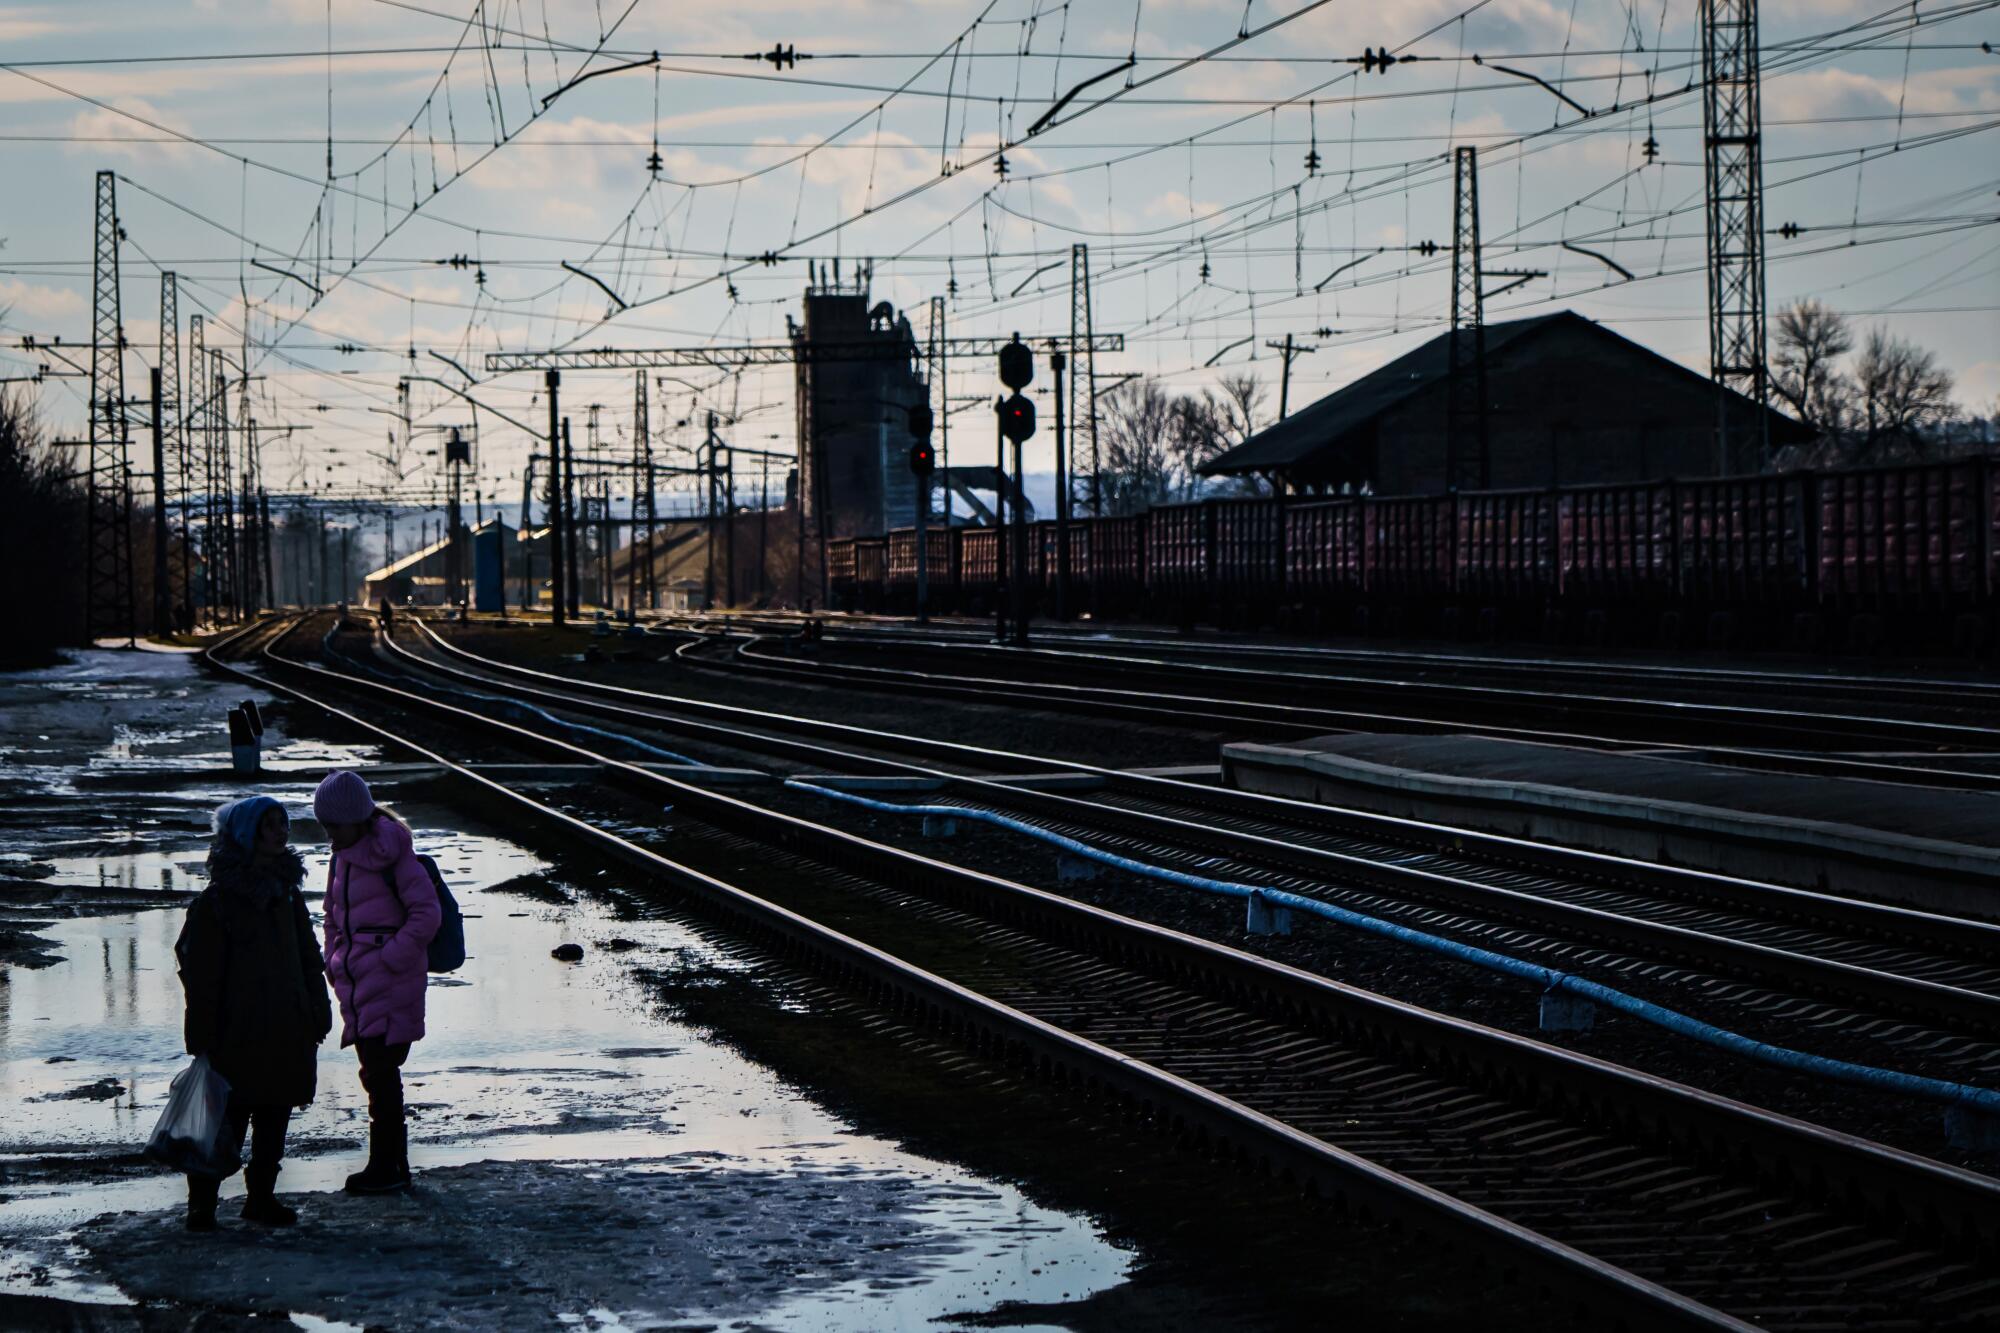 Two people stand near rail tracks amid rain puddles outside at a train station.